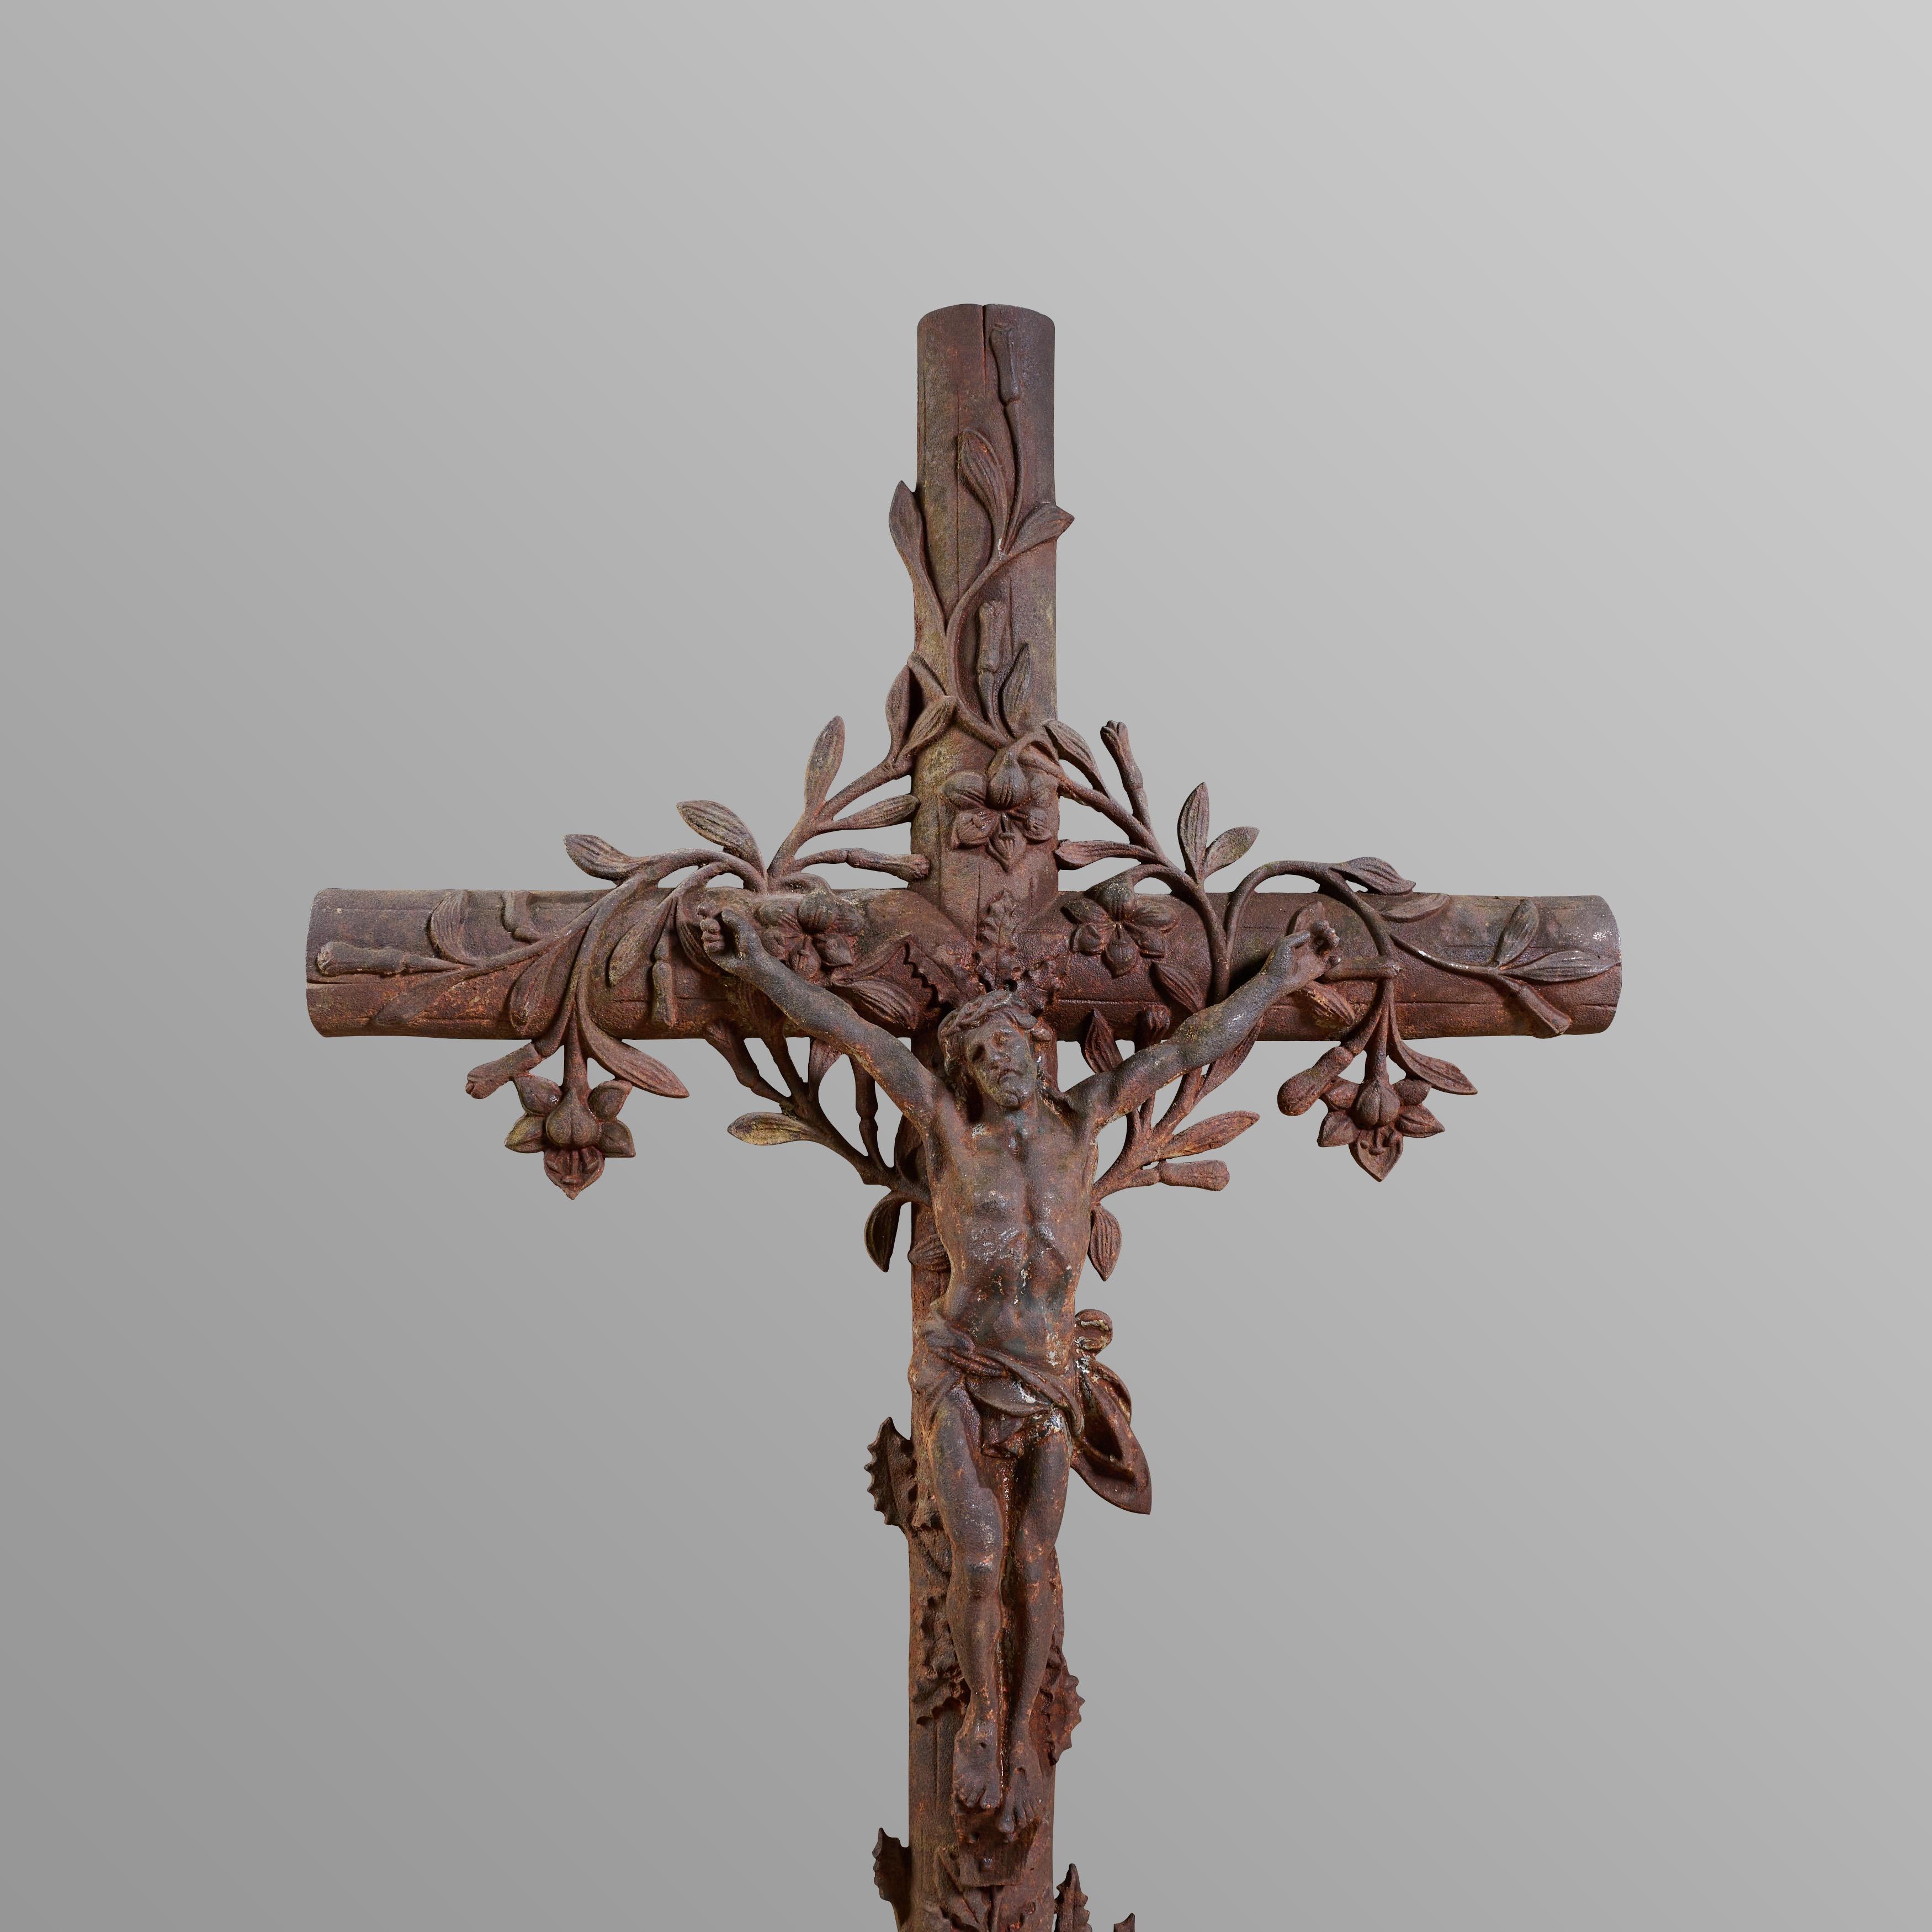 Cast iron crucifix. Great casting and quality.

